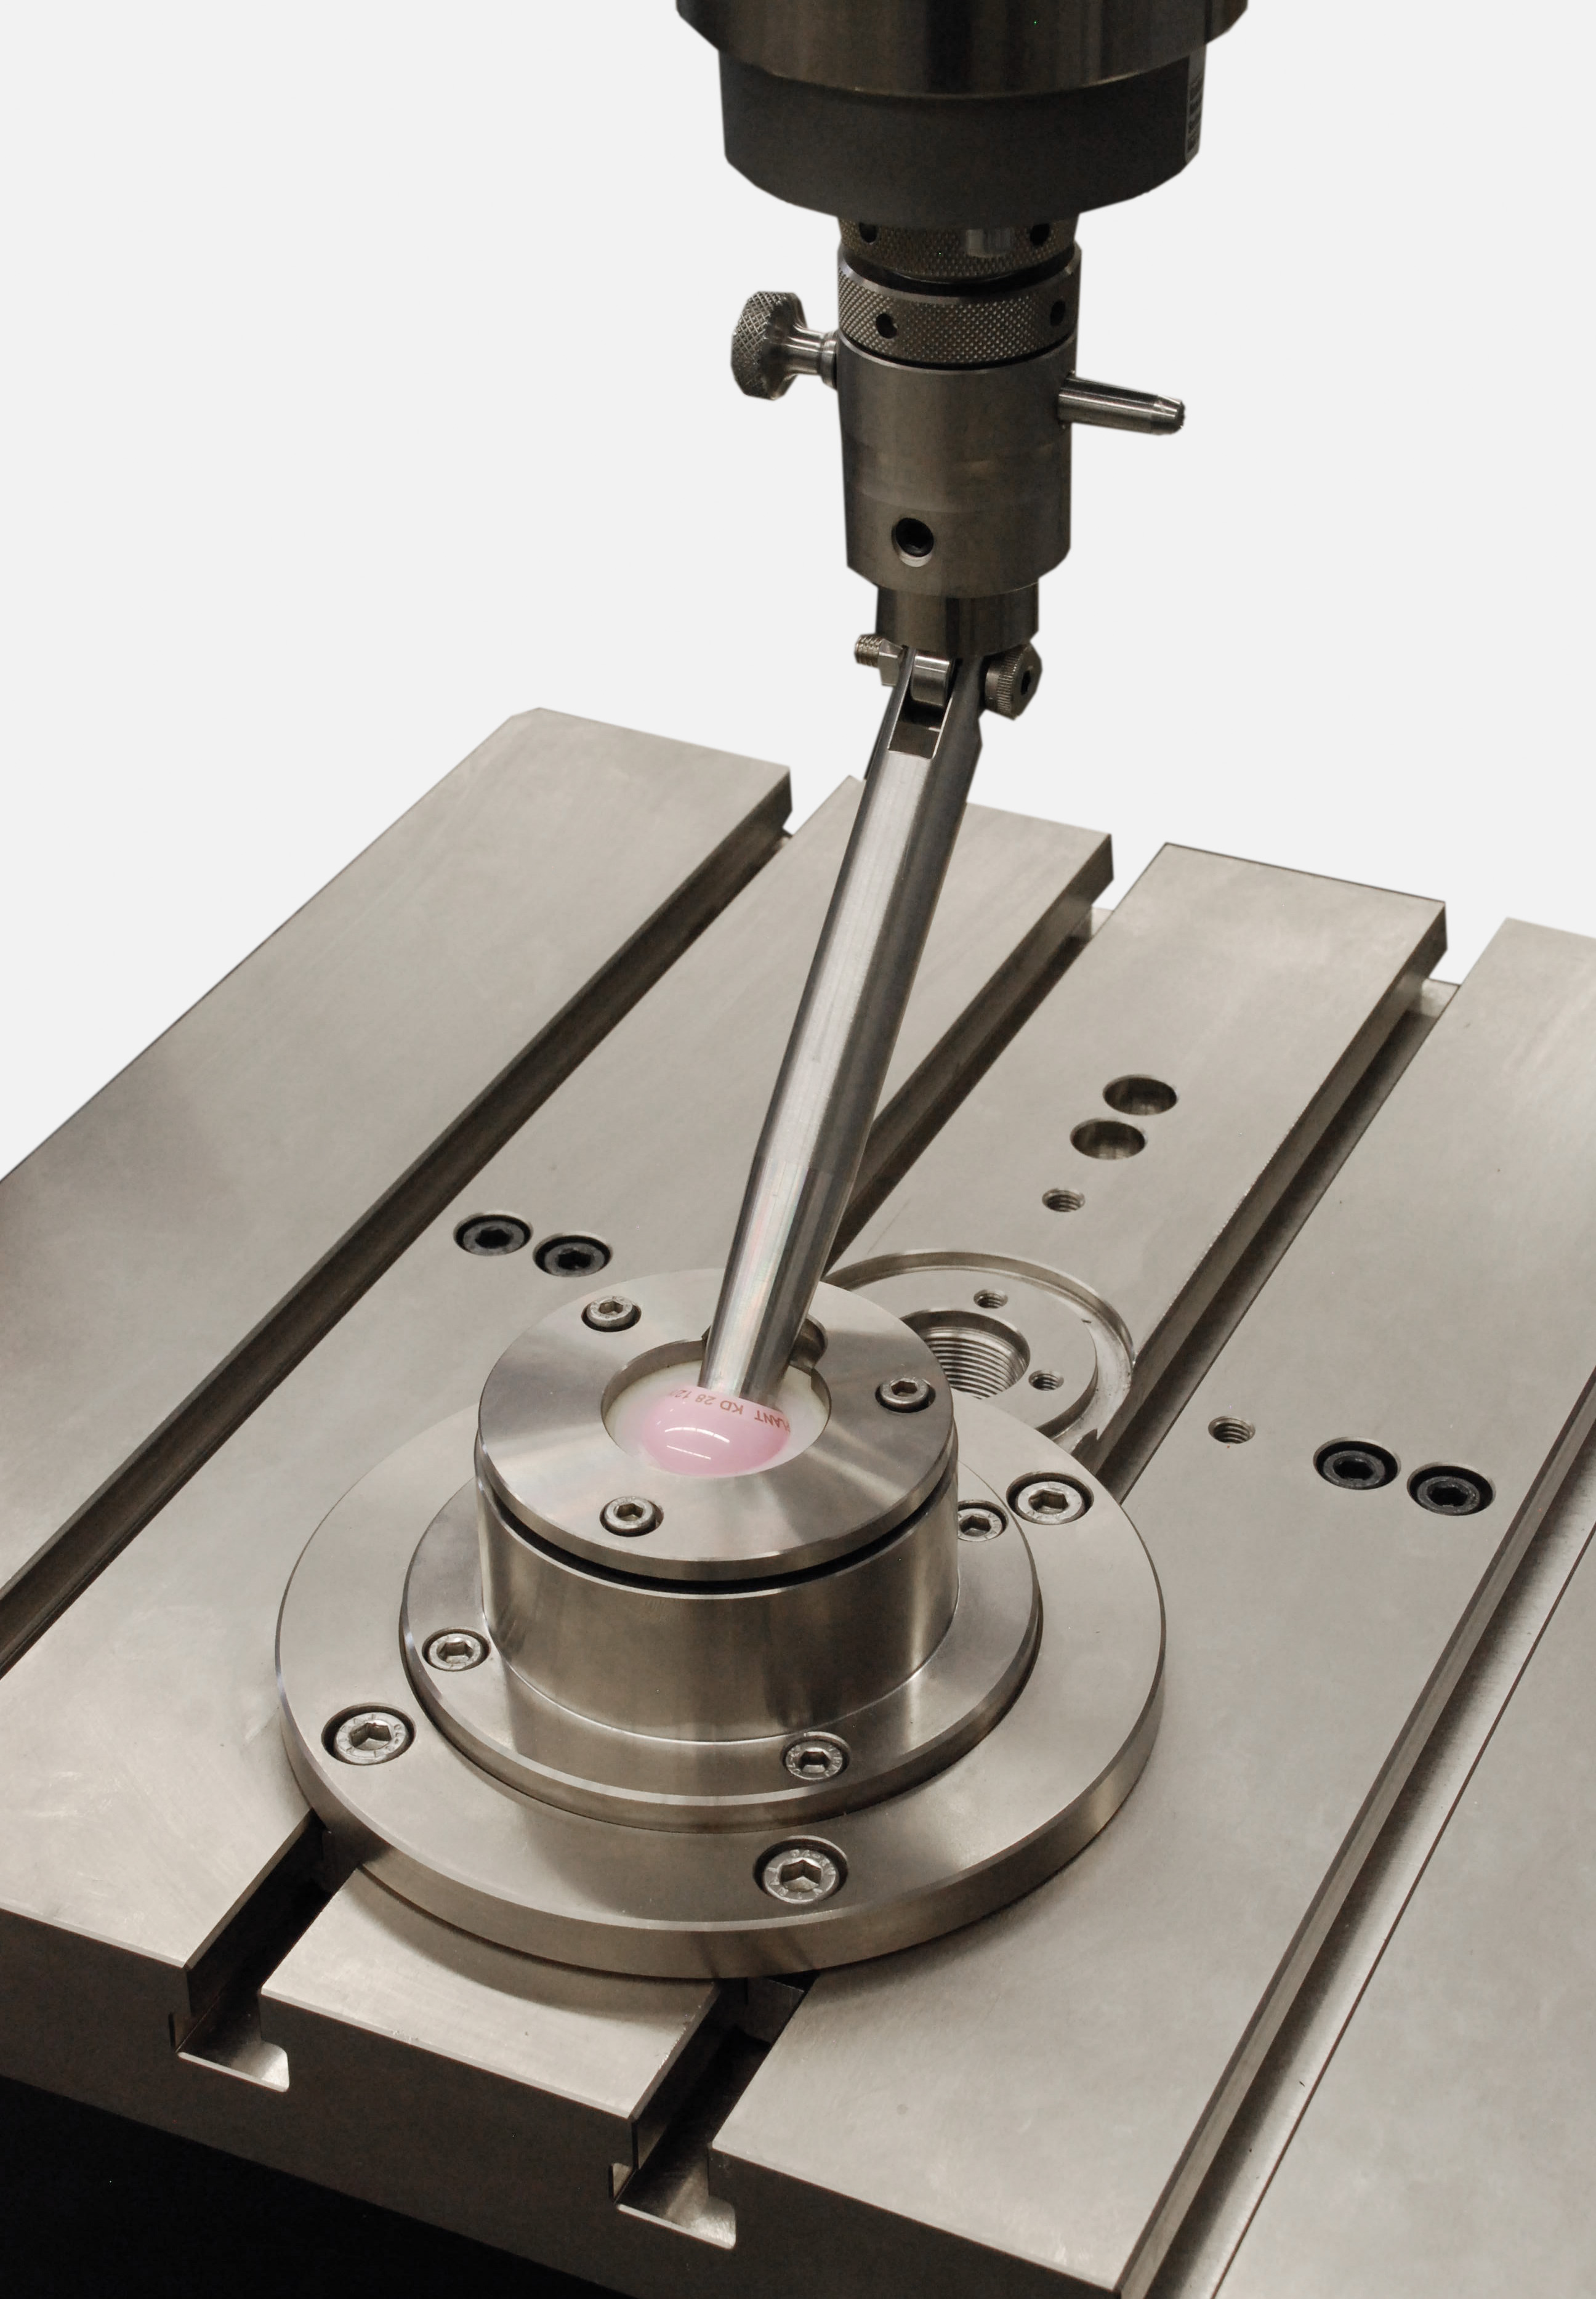 Test fixture for lever-out tests to ASTM F1820